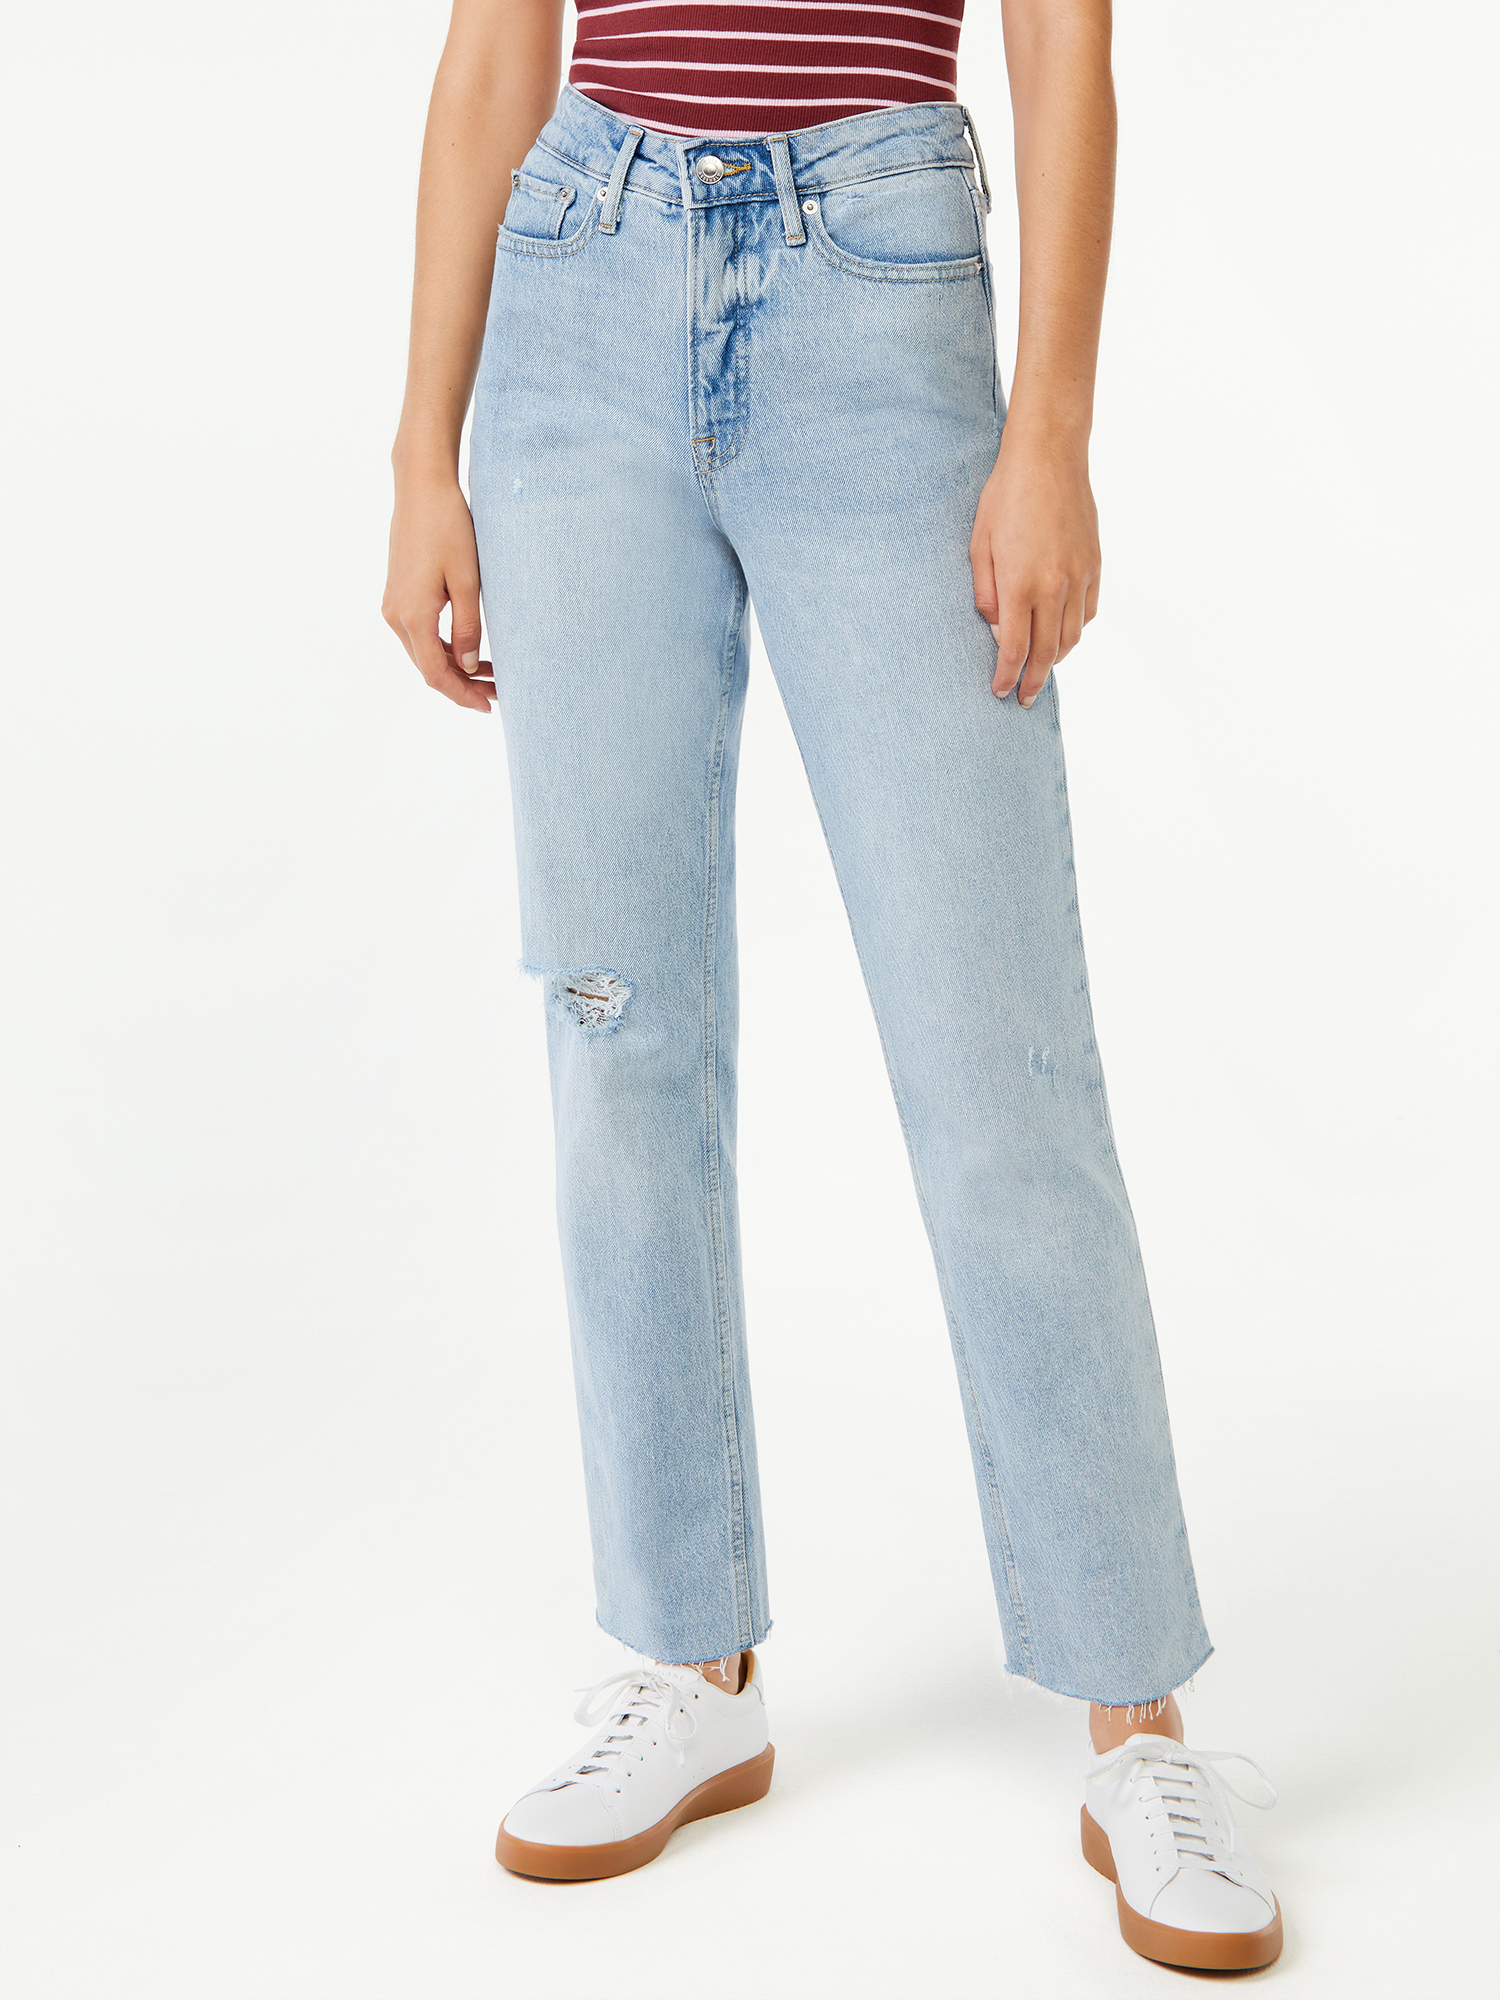 Free Assembly Women's Super High Rise Straight Jeans - image 1 of 6